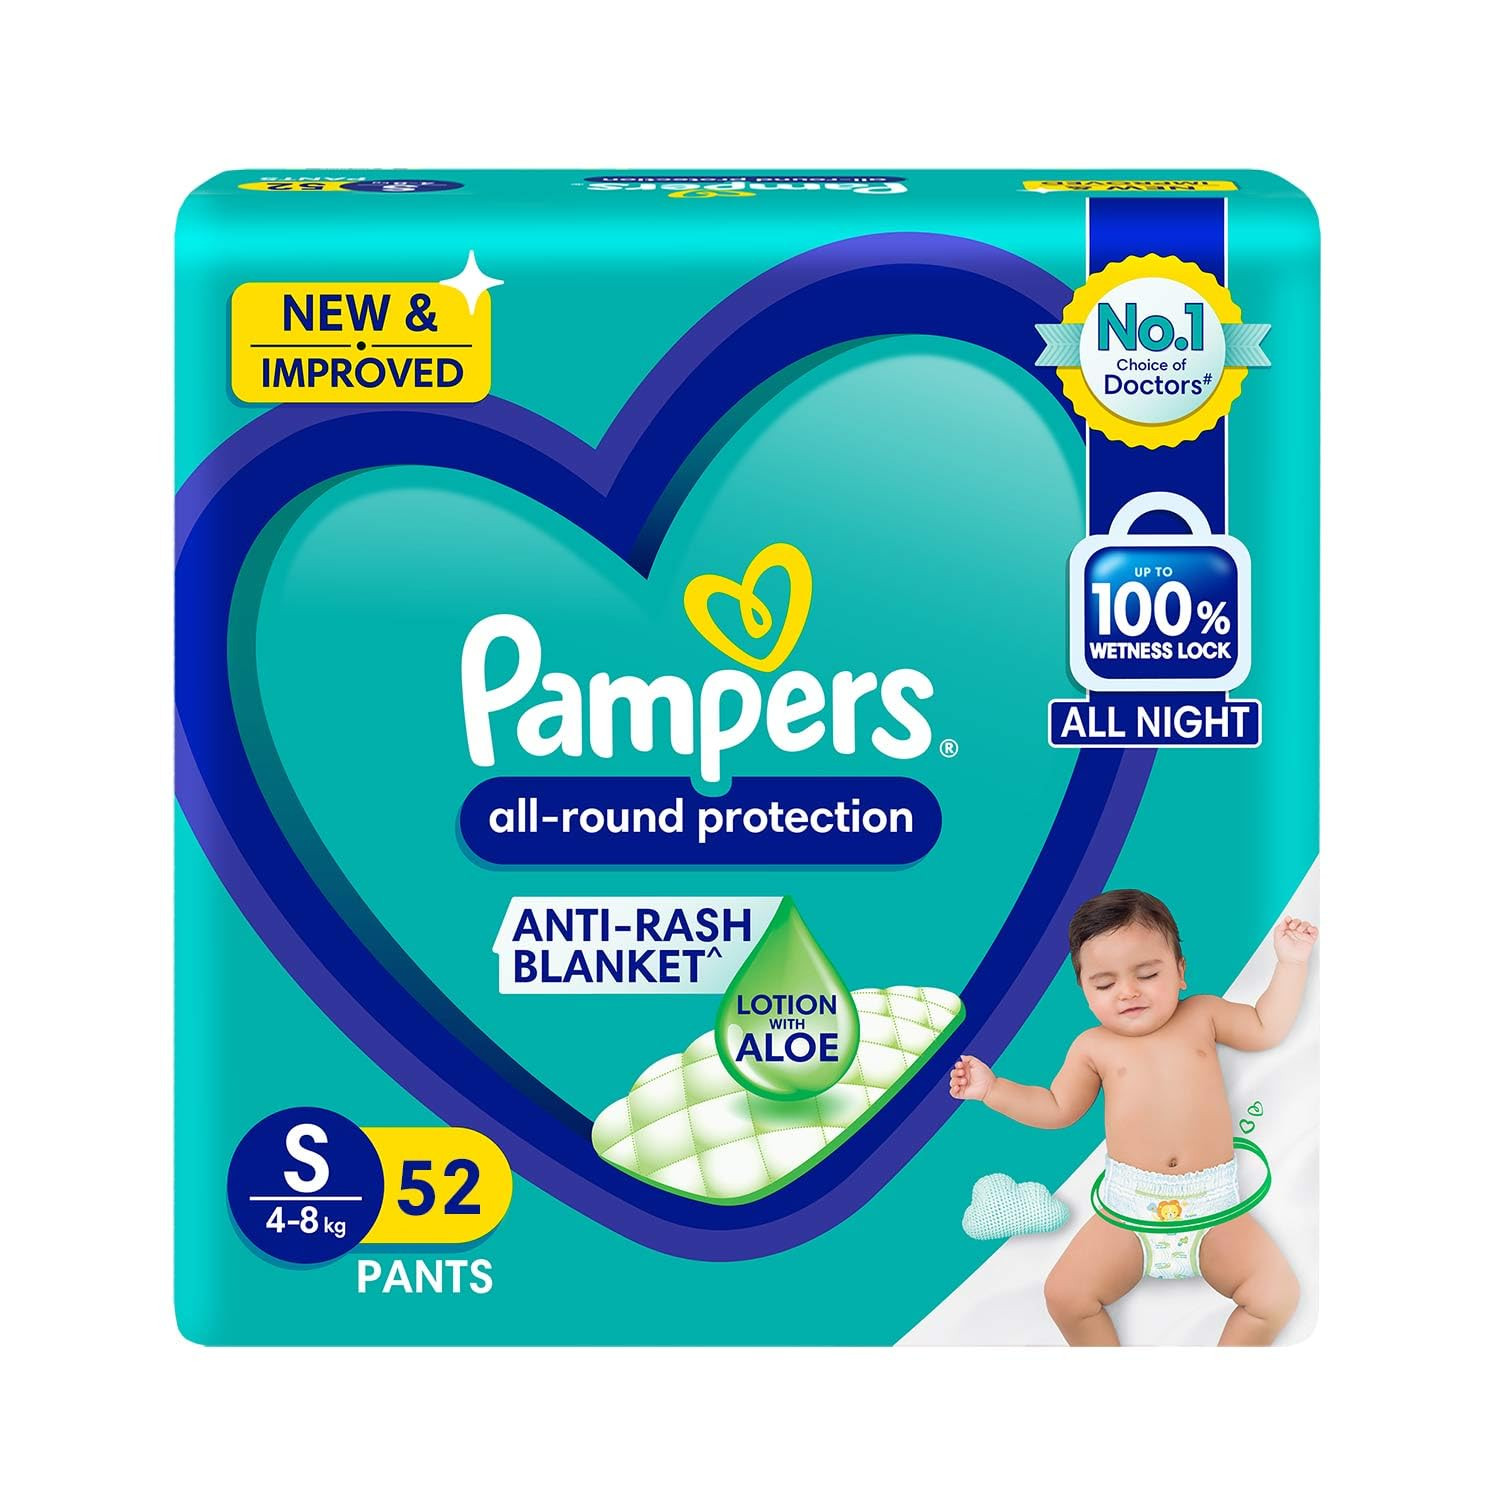 Pampers All round Protection Pants Style Baby Diapers, Small (S) Size, 52 Count, Anti Rash Blanket, Lotion with Aloe Vera, 4-8kg Diapers